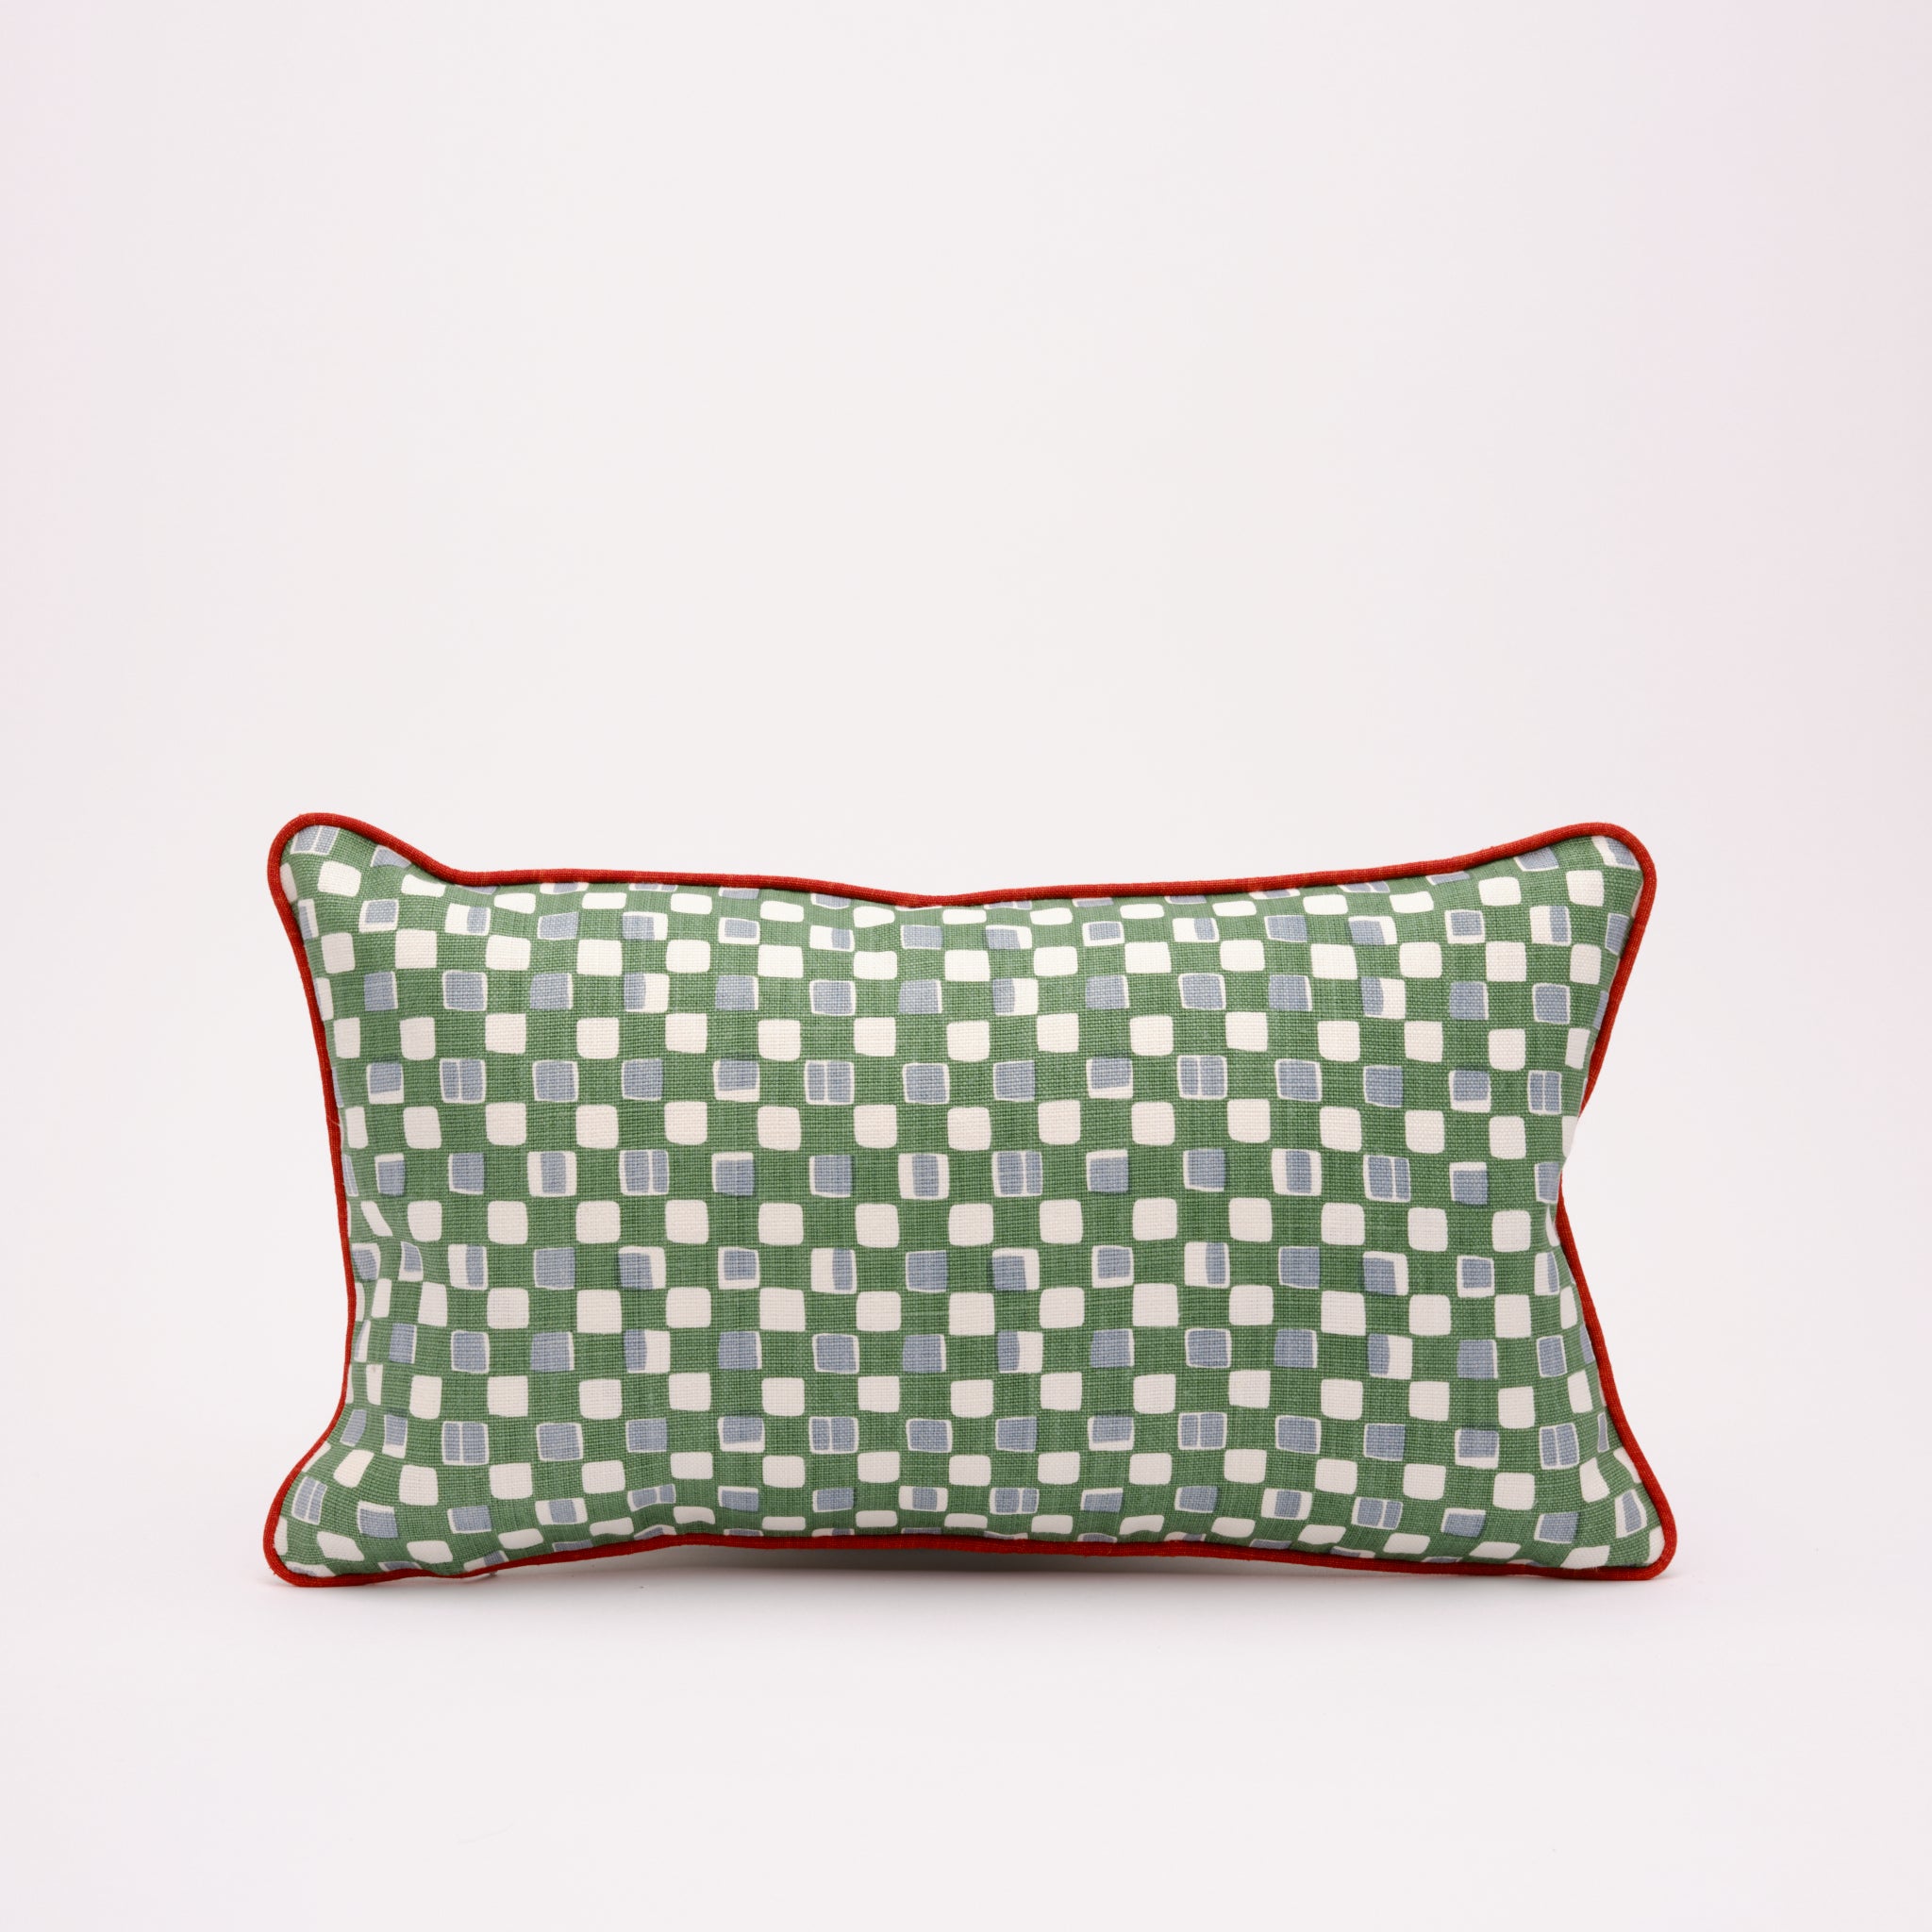 Rectangular Cushion with Orange Contrast Piping (Green)